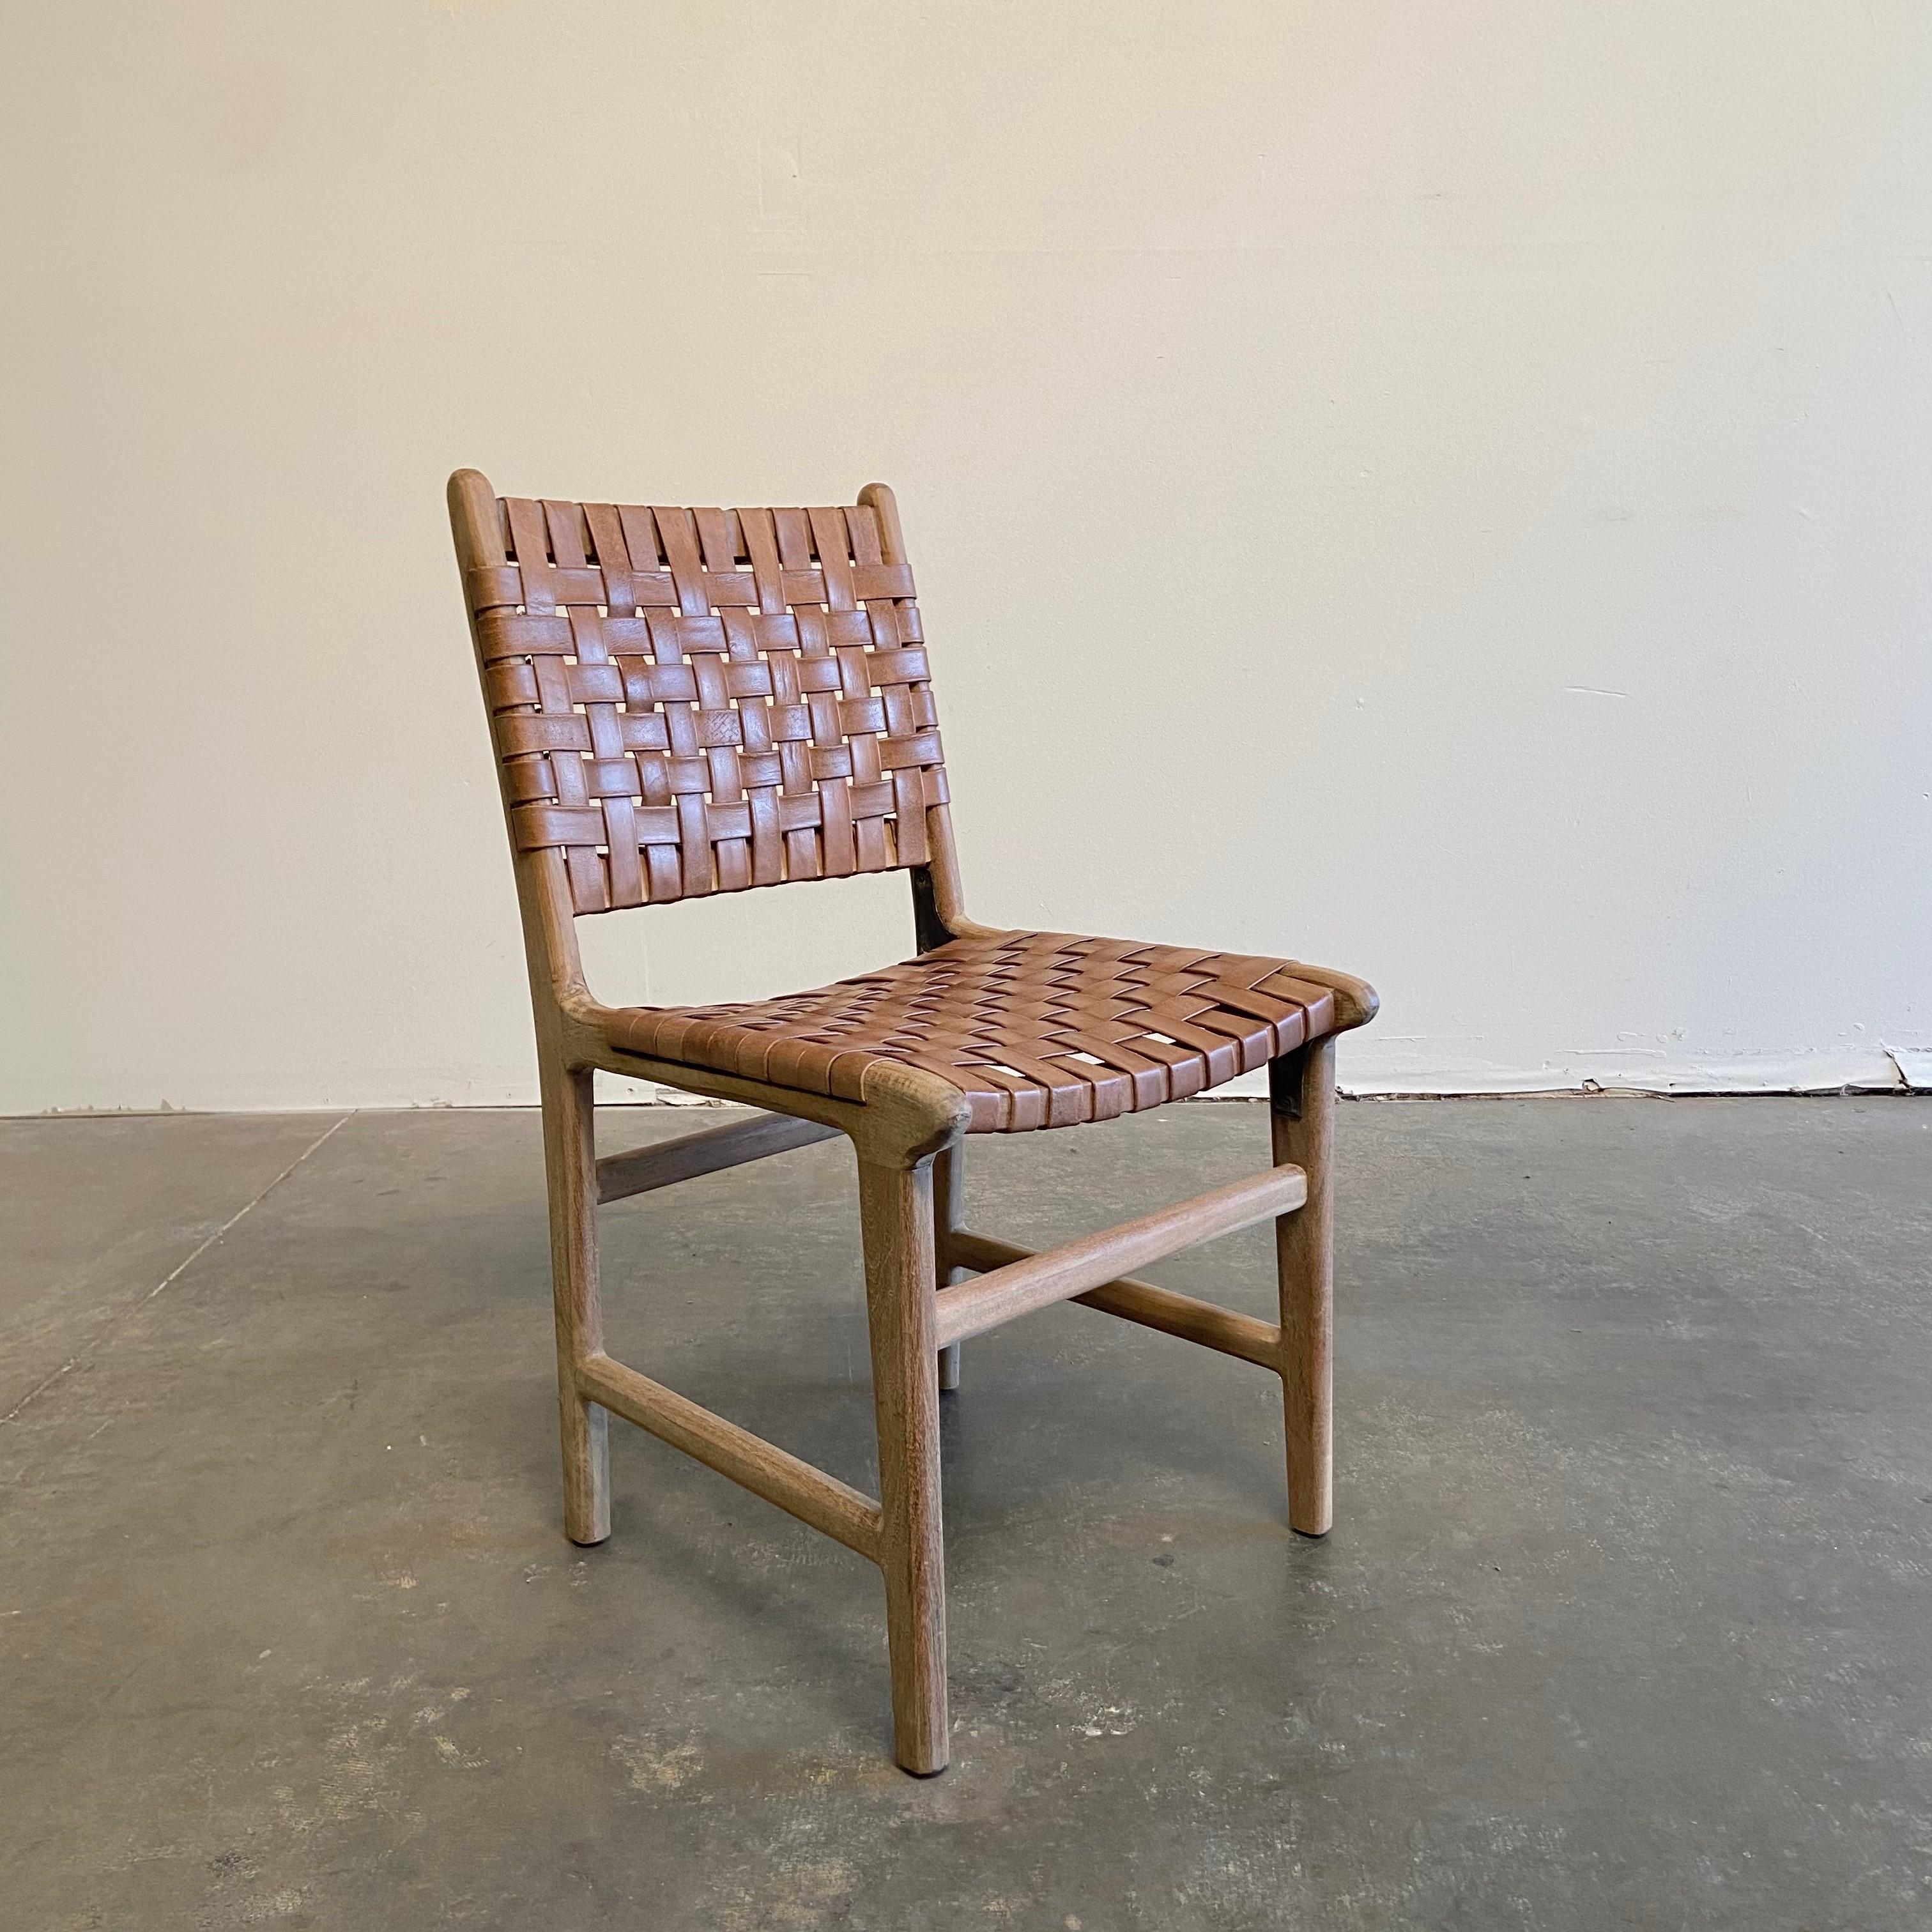 Brown leather strap diningchair 
Size: 18” W x 23” D x 33-1/2” H
SH: 18”
Beautiful vintage style leather in a chestnut brown, with natural teak frames.
Very solid and sturdy, very comfortable.
Part of our current production. Whatever we have in